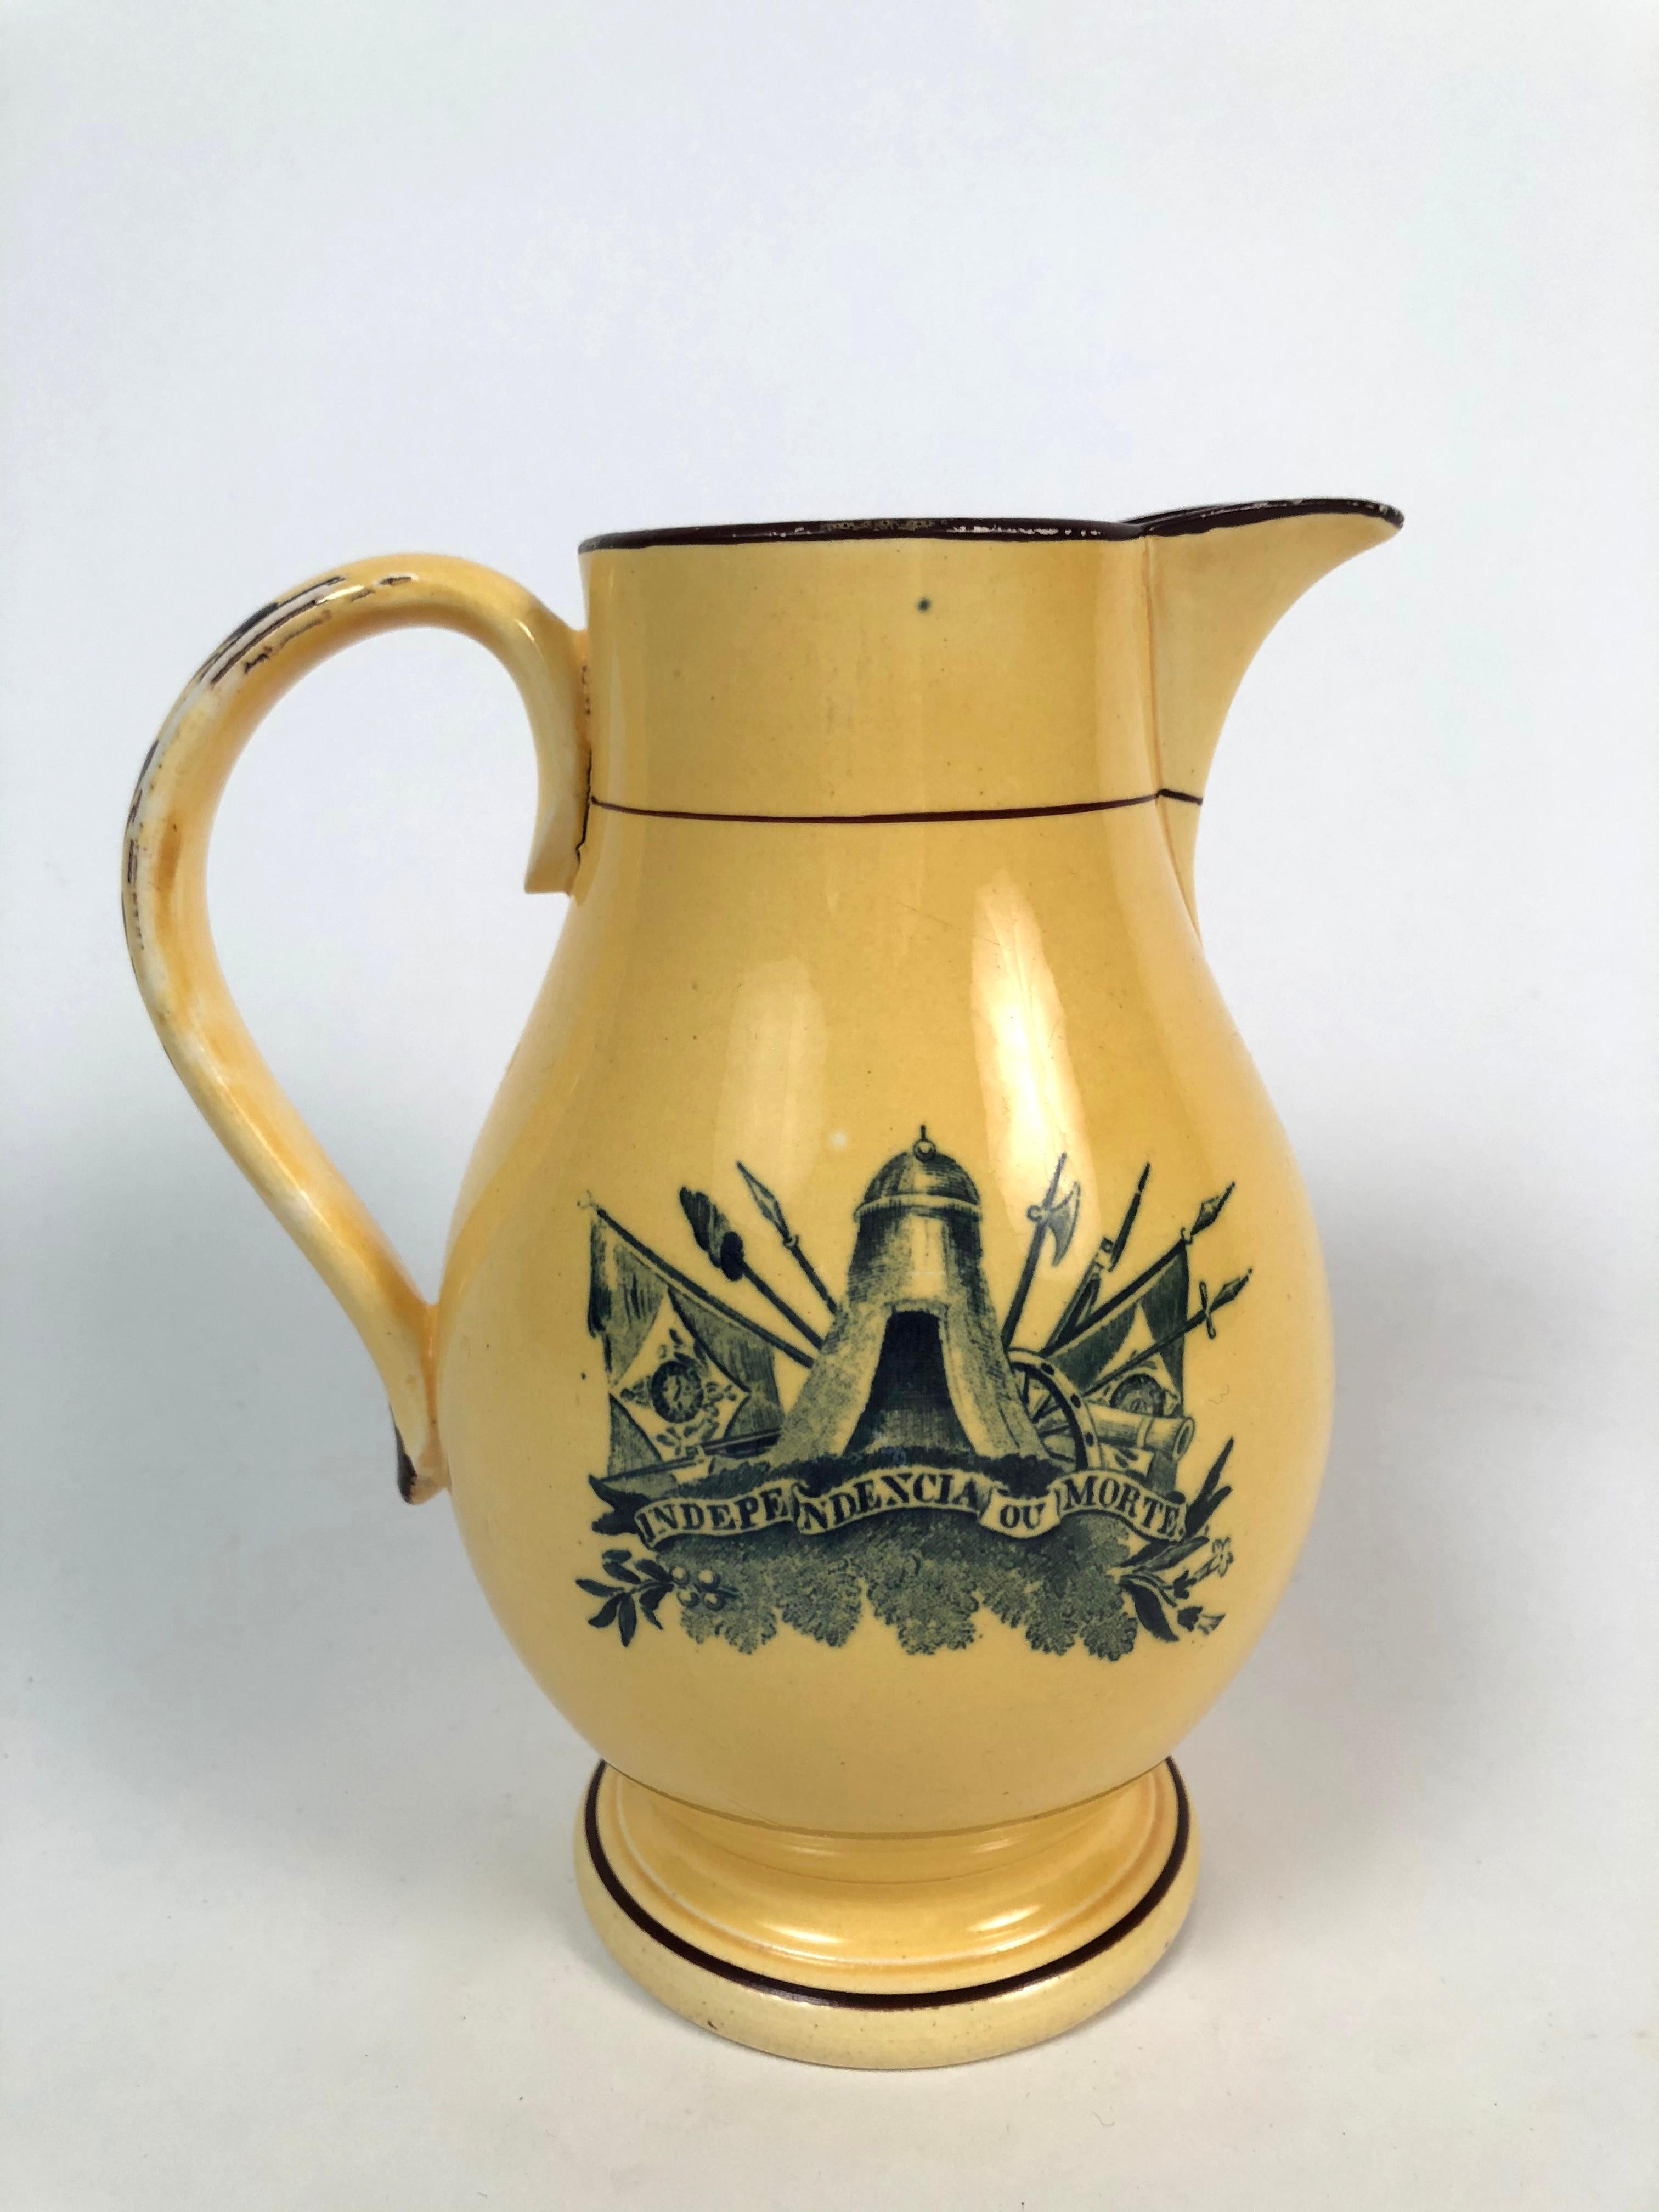 A rare Staffordshire pottery pear shaped pitcher with strap handle, made to commemorate the independence of Brazil from Portugal in 1822, transfer printed in blue on canary yellow with the slogan 